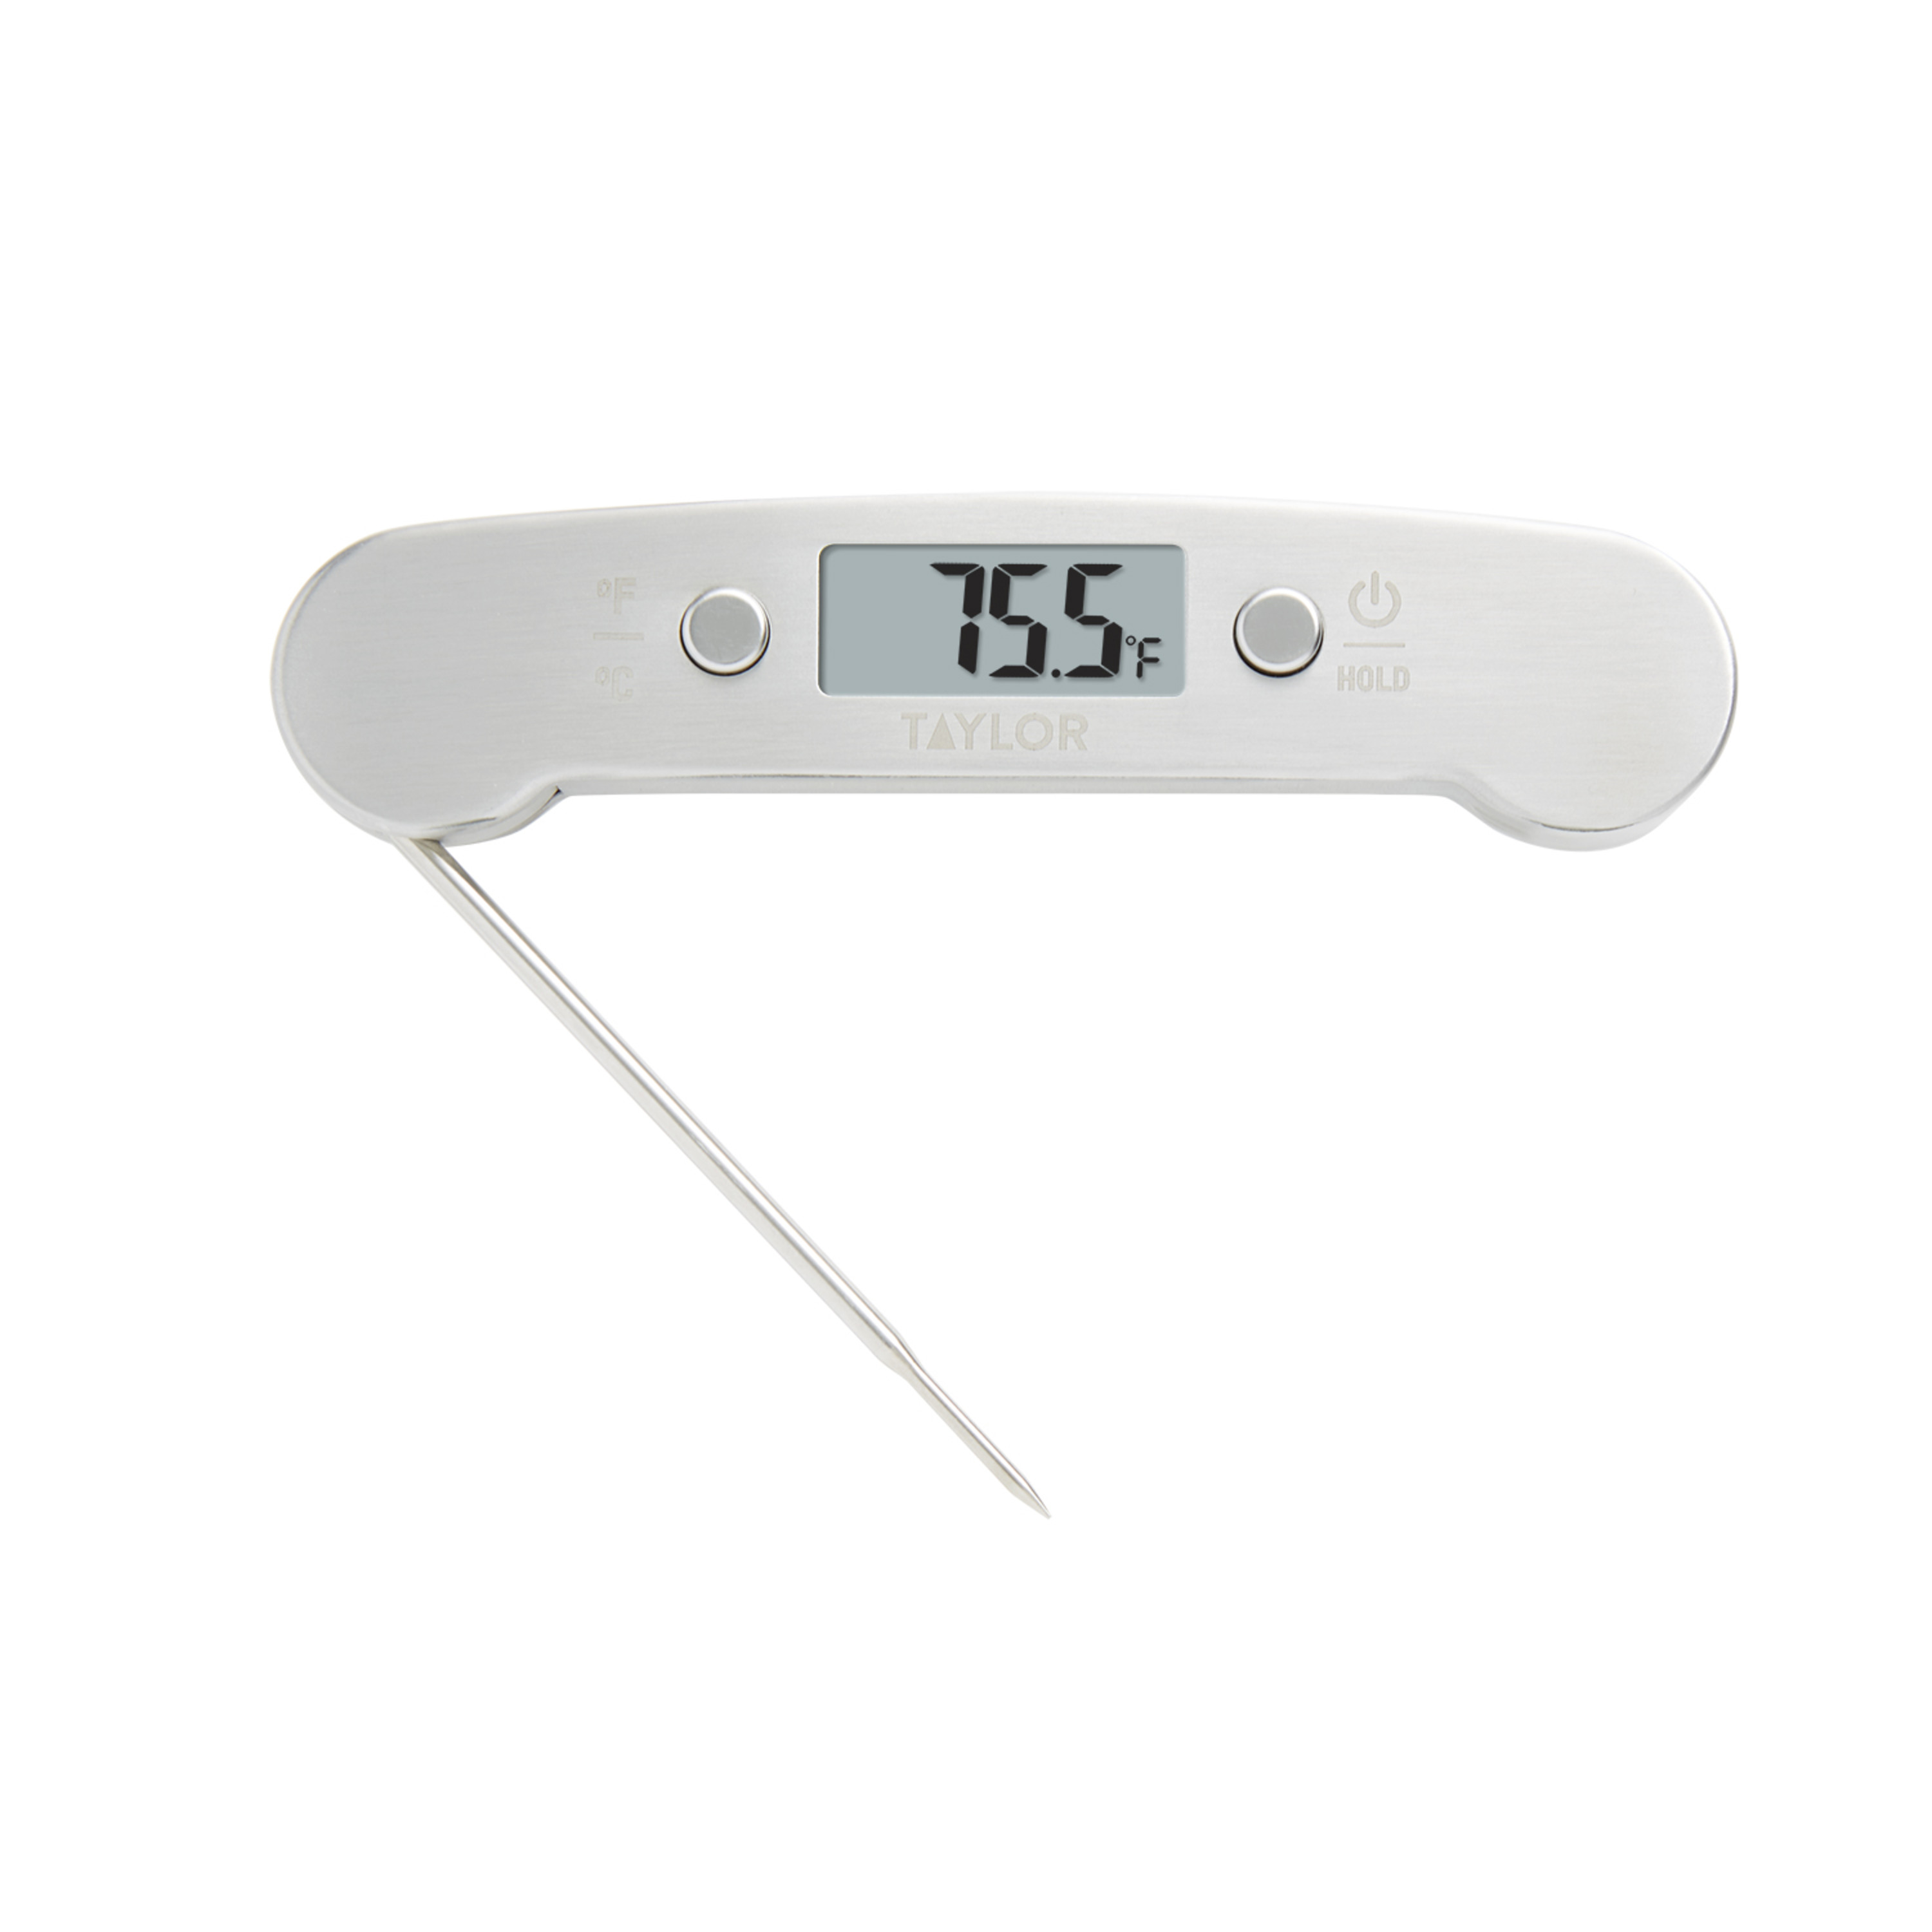 Talylor Pro Folding Pen Digital Thermometer Stainless Steel - image 1 of 9